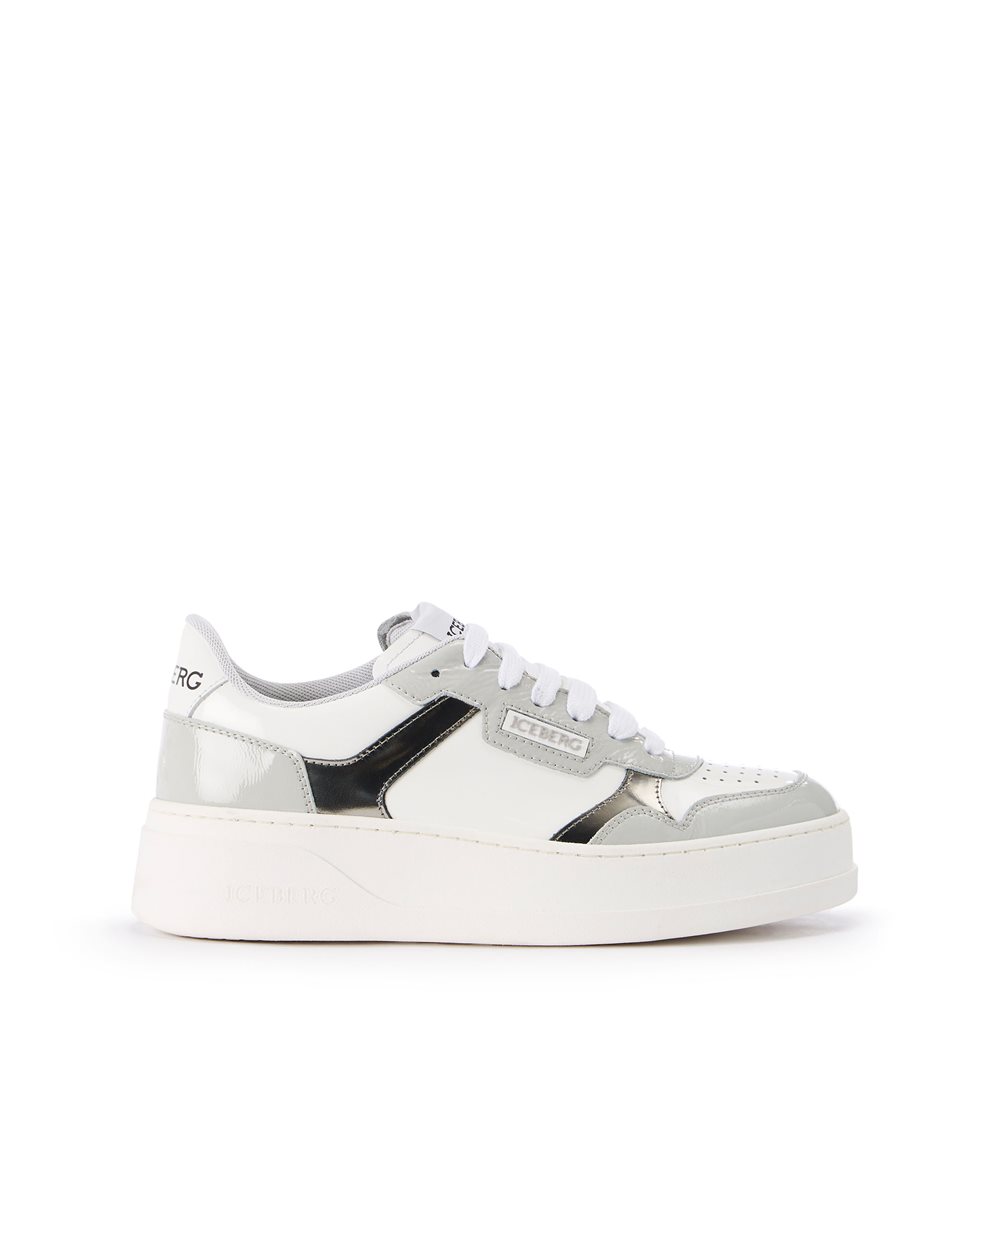 Versatile sneakers with chunky sole - carosello HP woman accessories | Iceberg - Official Website